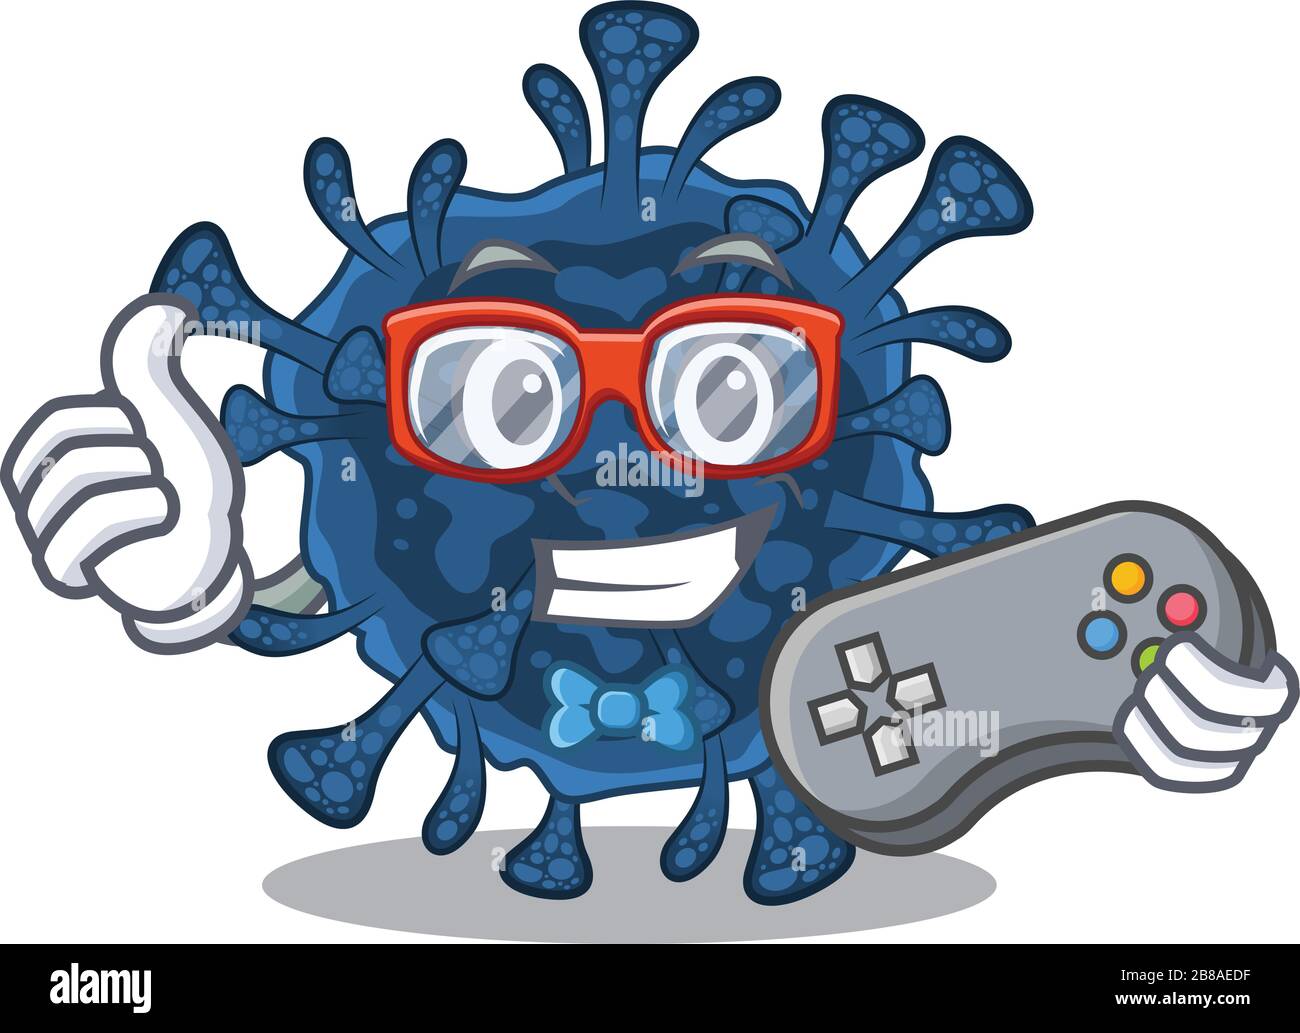 Cool Gamer Of Decacovirus Mascot Design Style With Controller Stock Vector Image Art Alamy